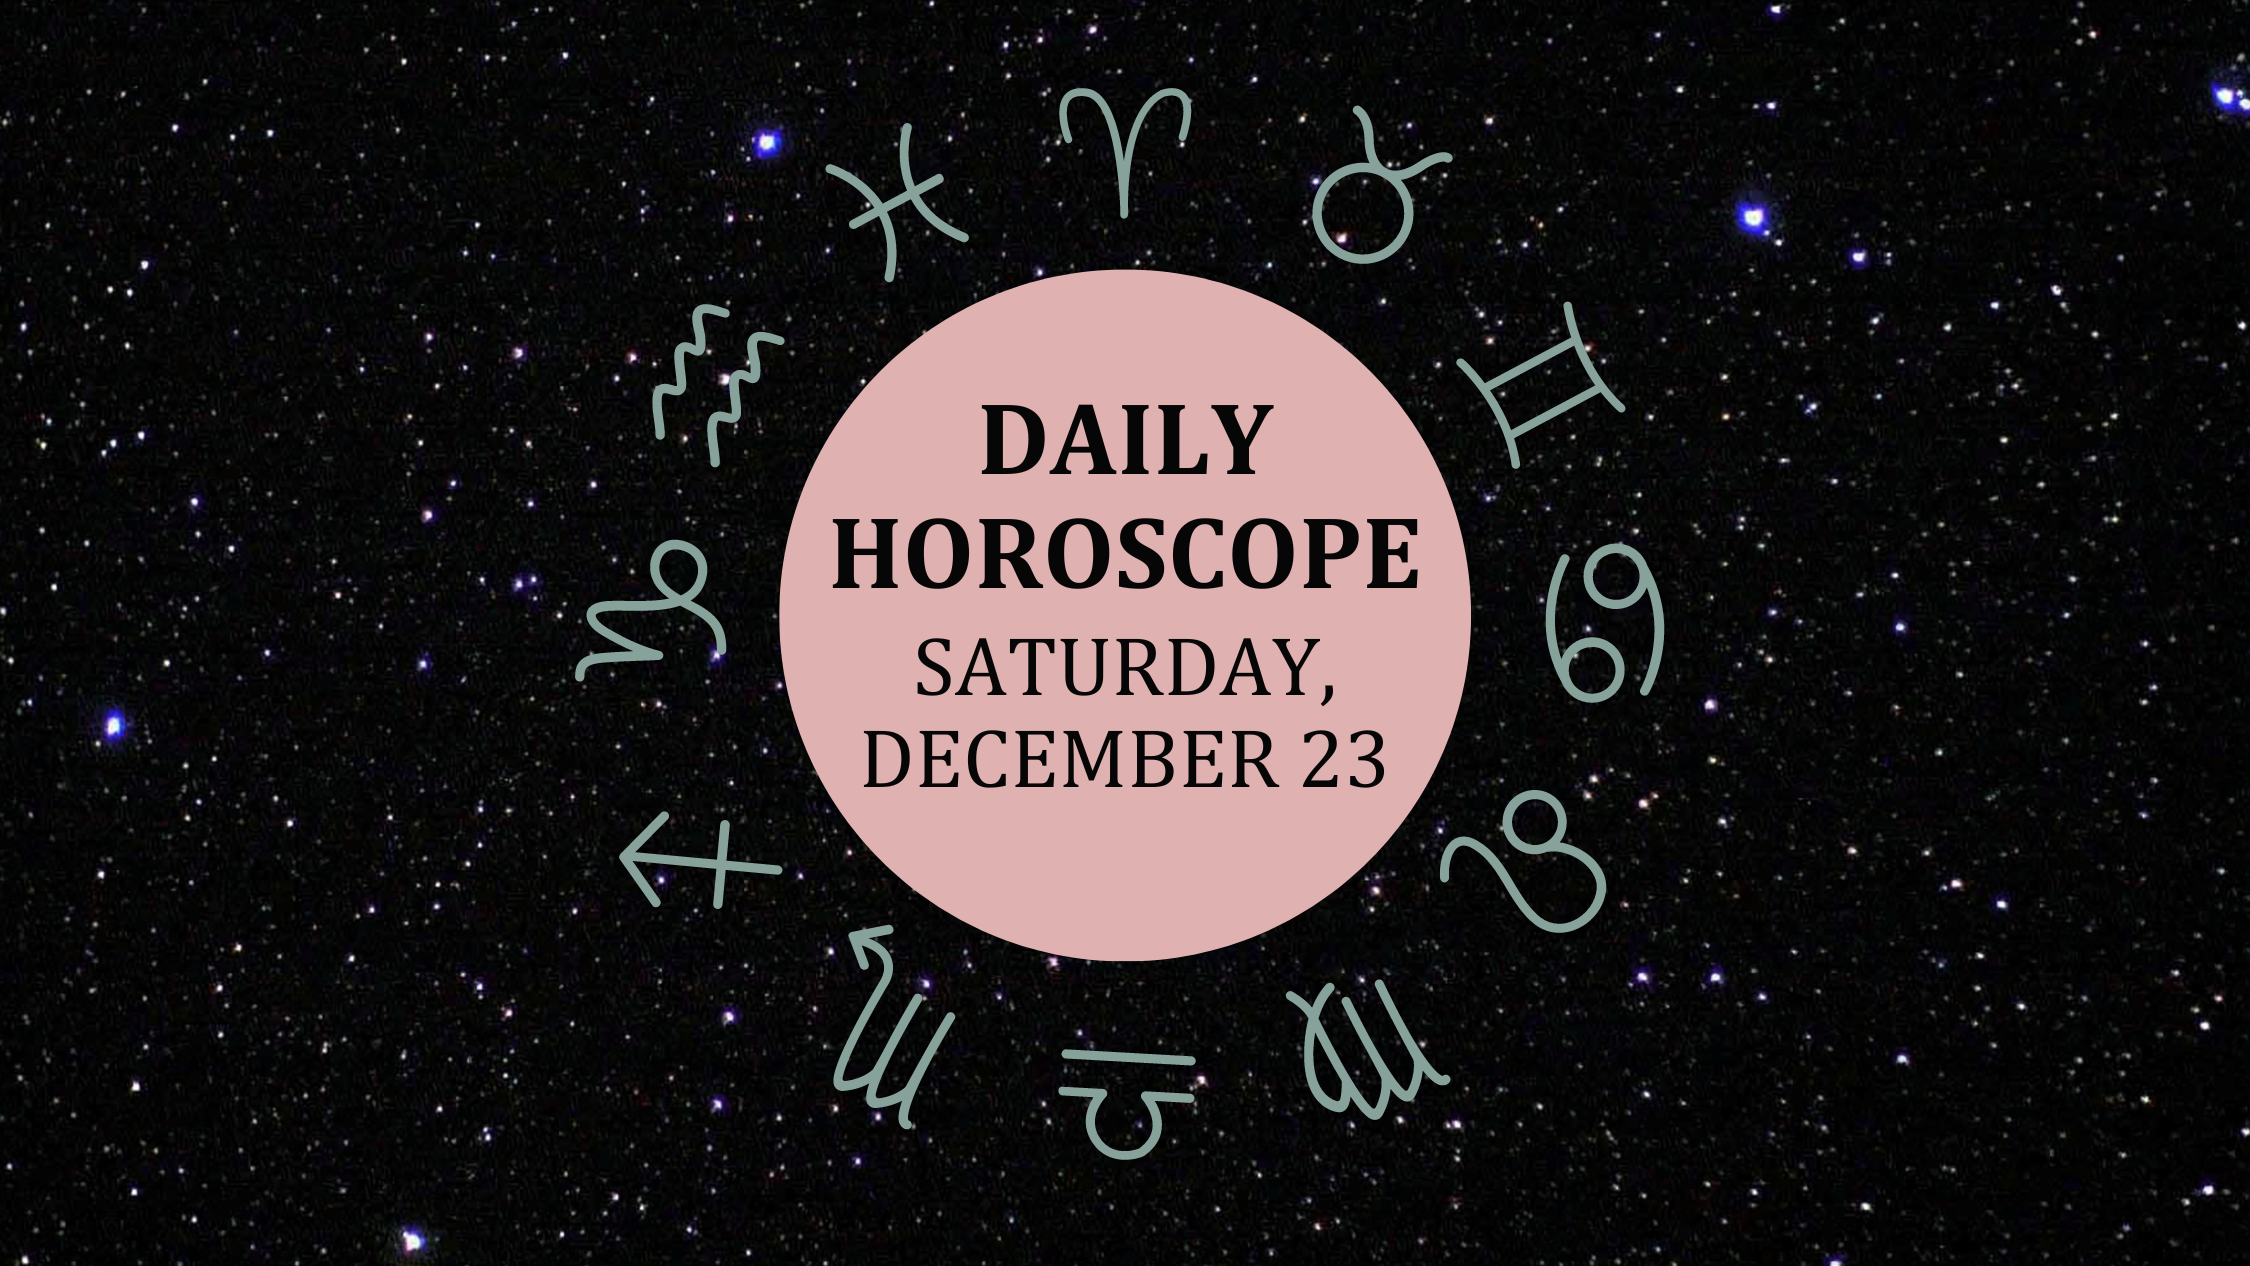 Zodiac wheel with text in the middle: "Daily Horoscope: Saturday, December 23"